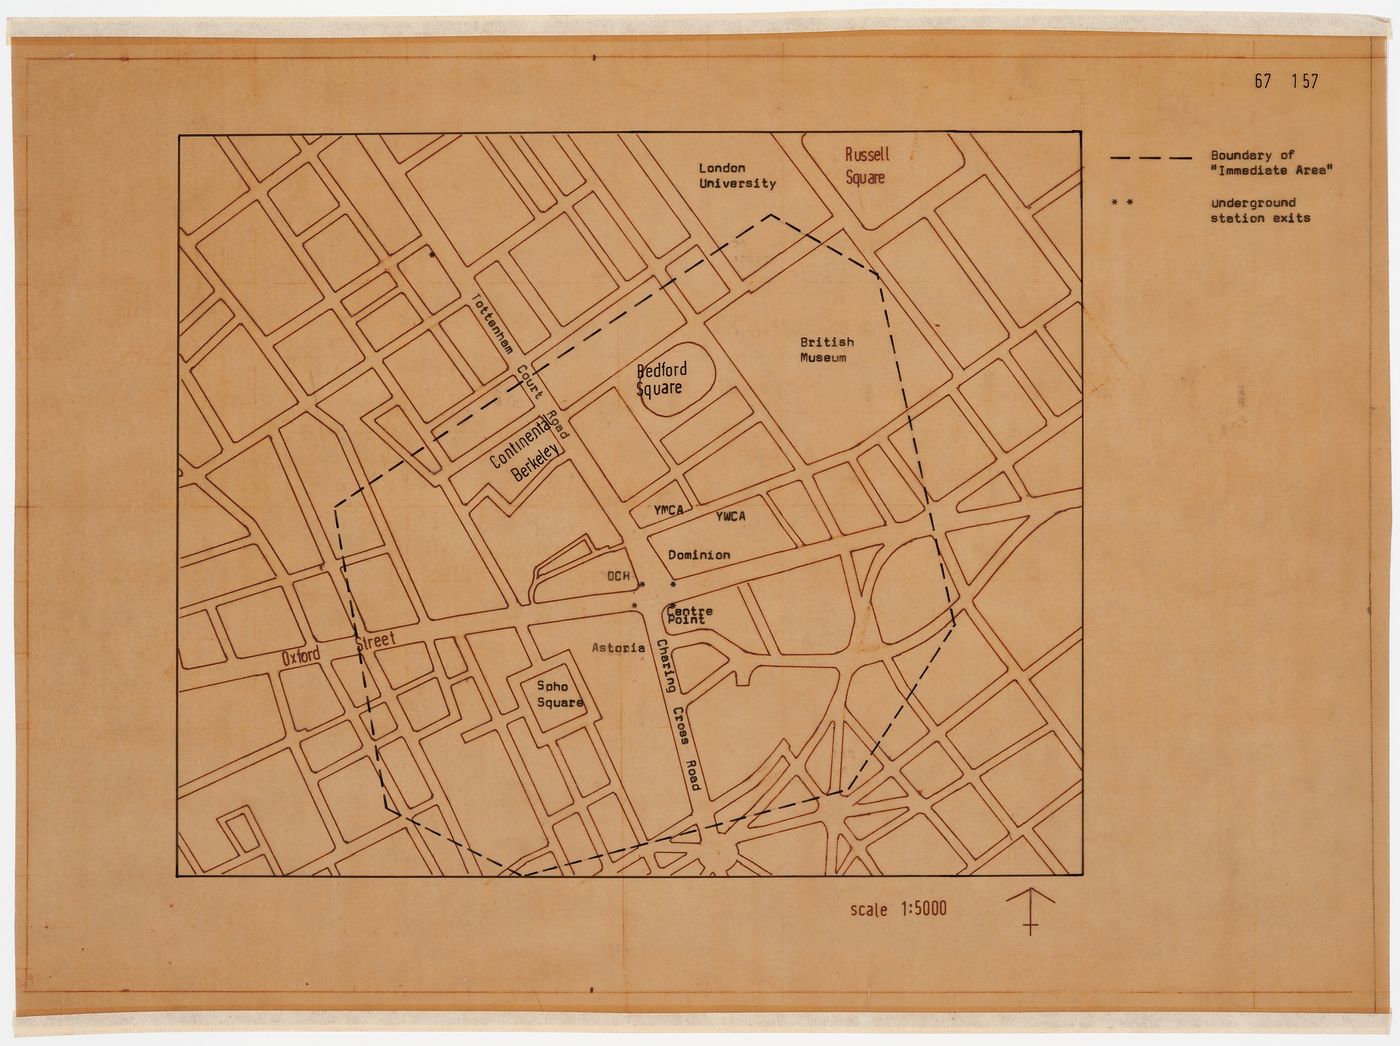 Map showing boundary of "immediate area" for Oxford Corner House, London, England